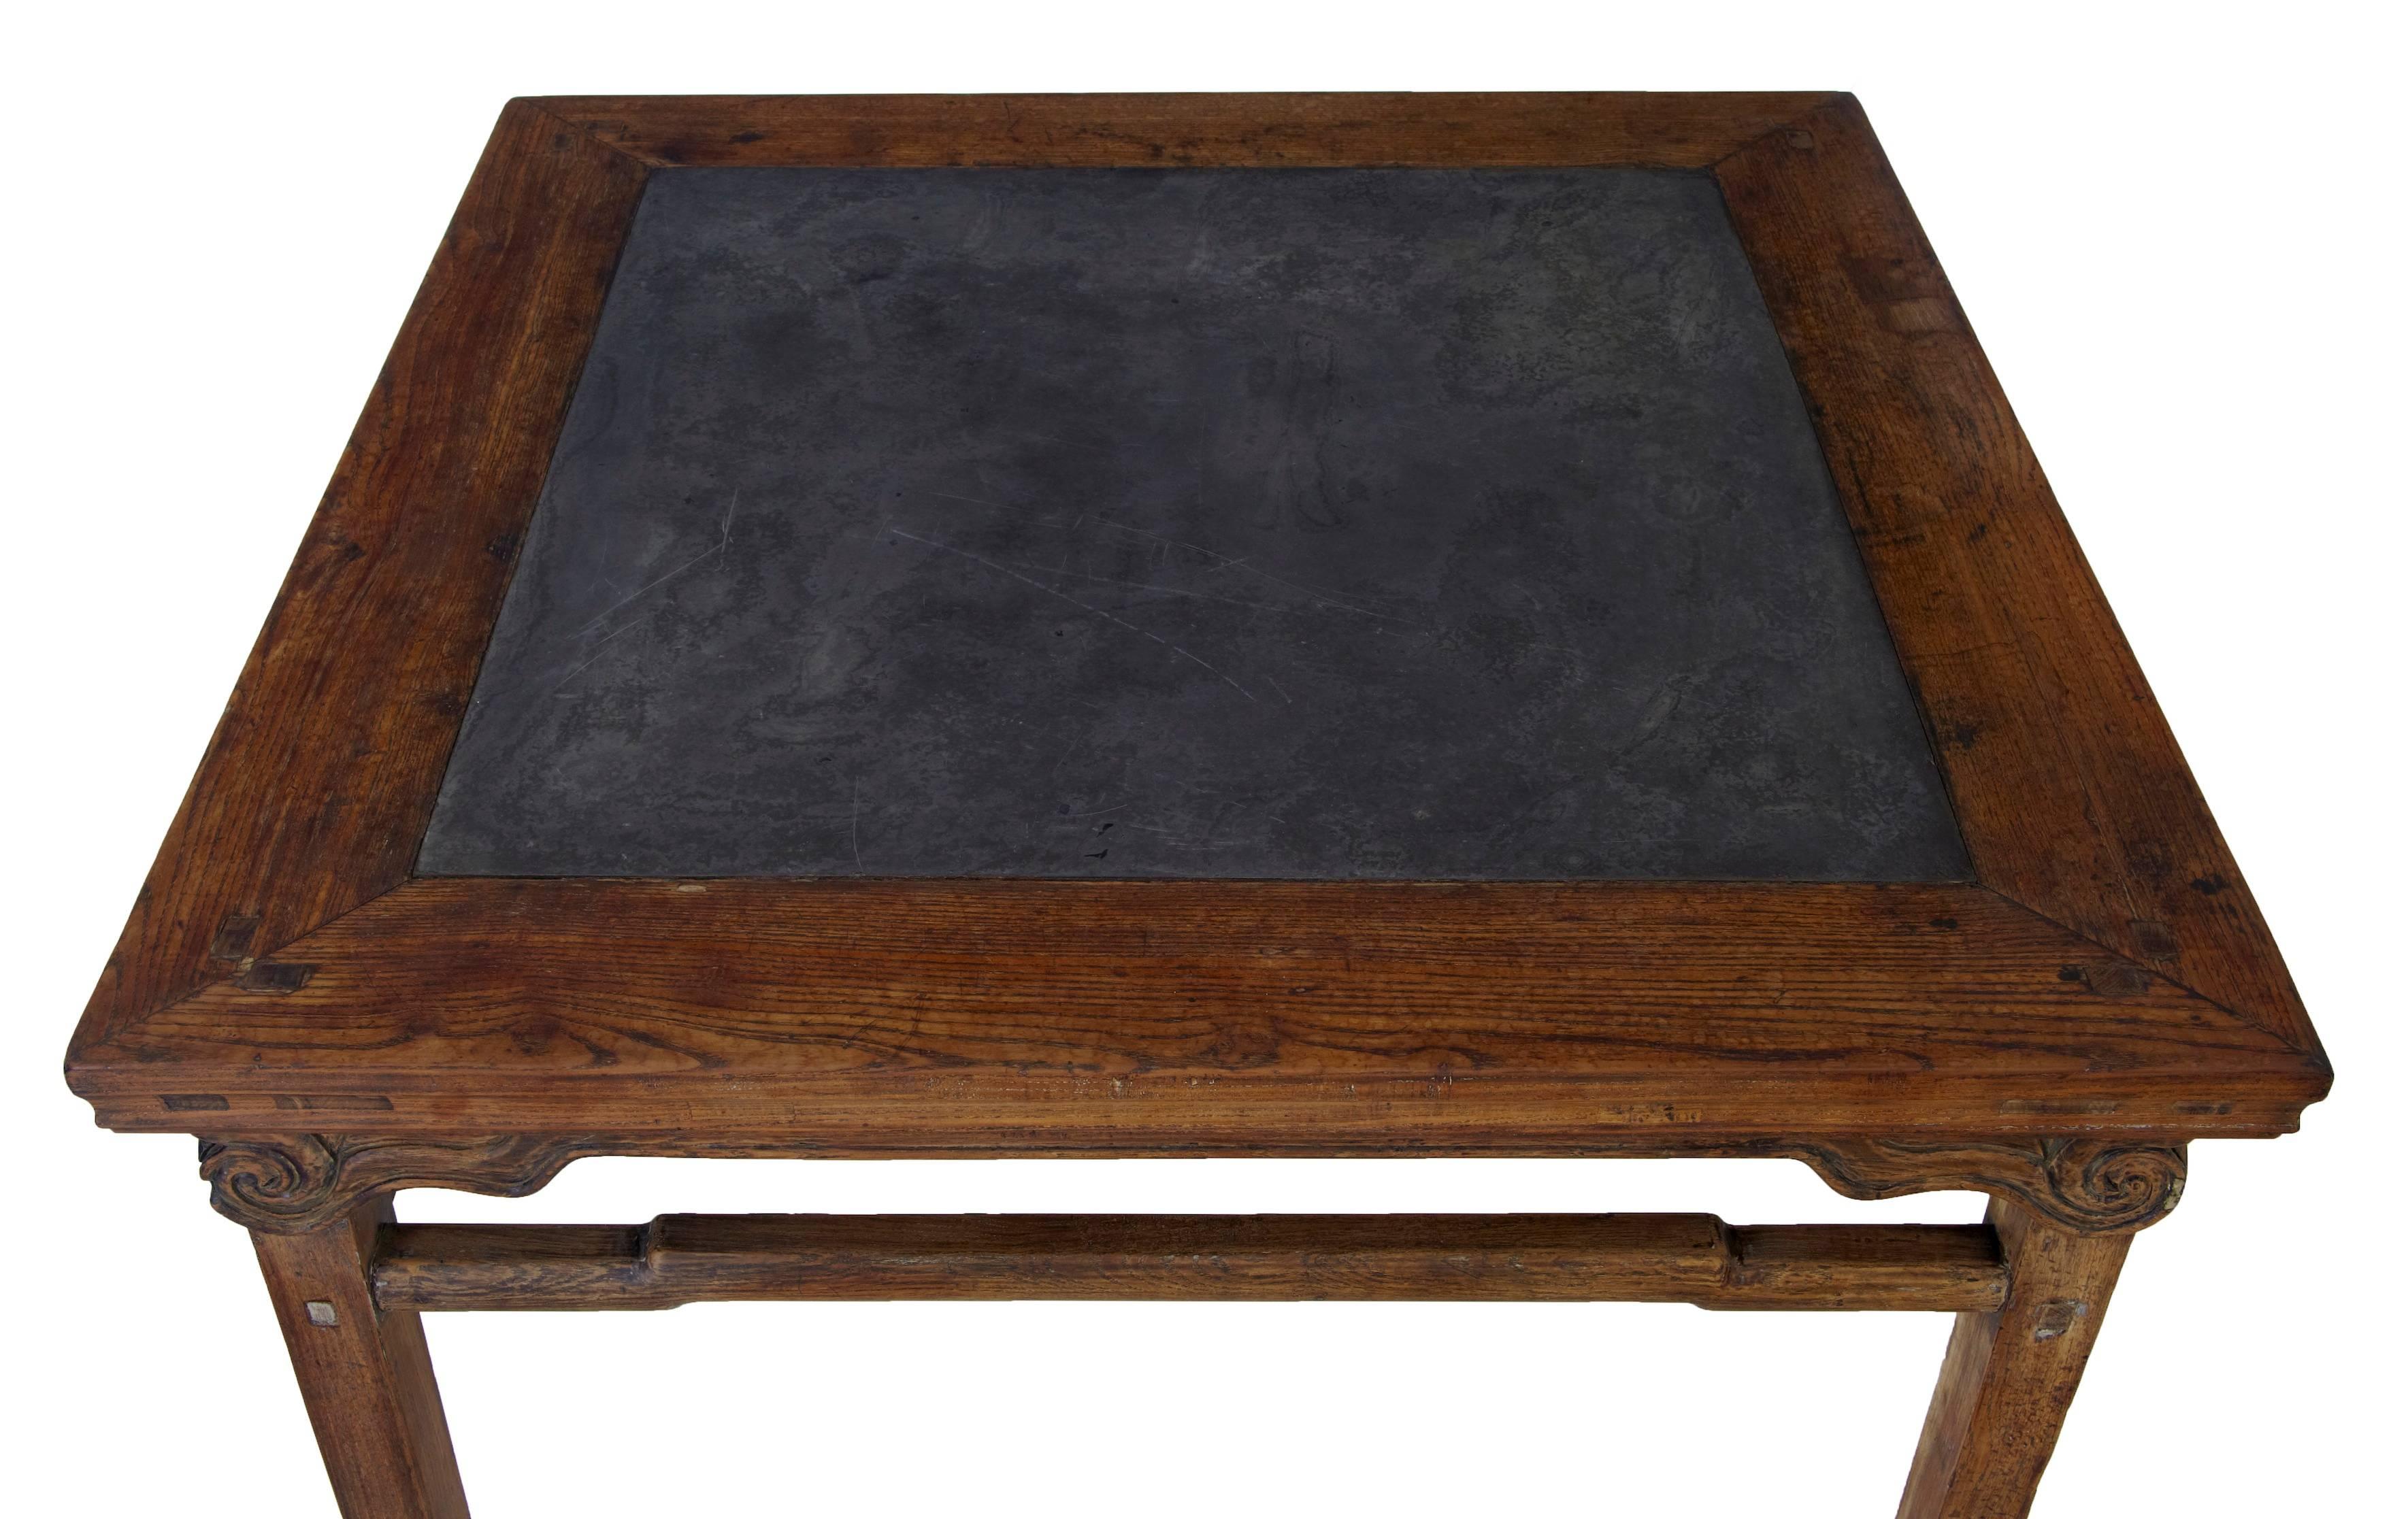 Chinese Export Large 19th Century Chinese Hard Wood Marble Inset Table